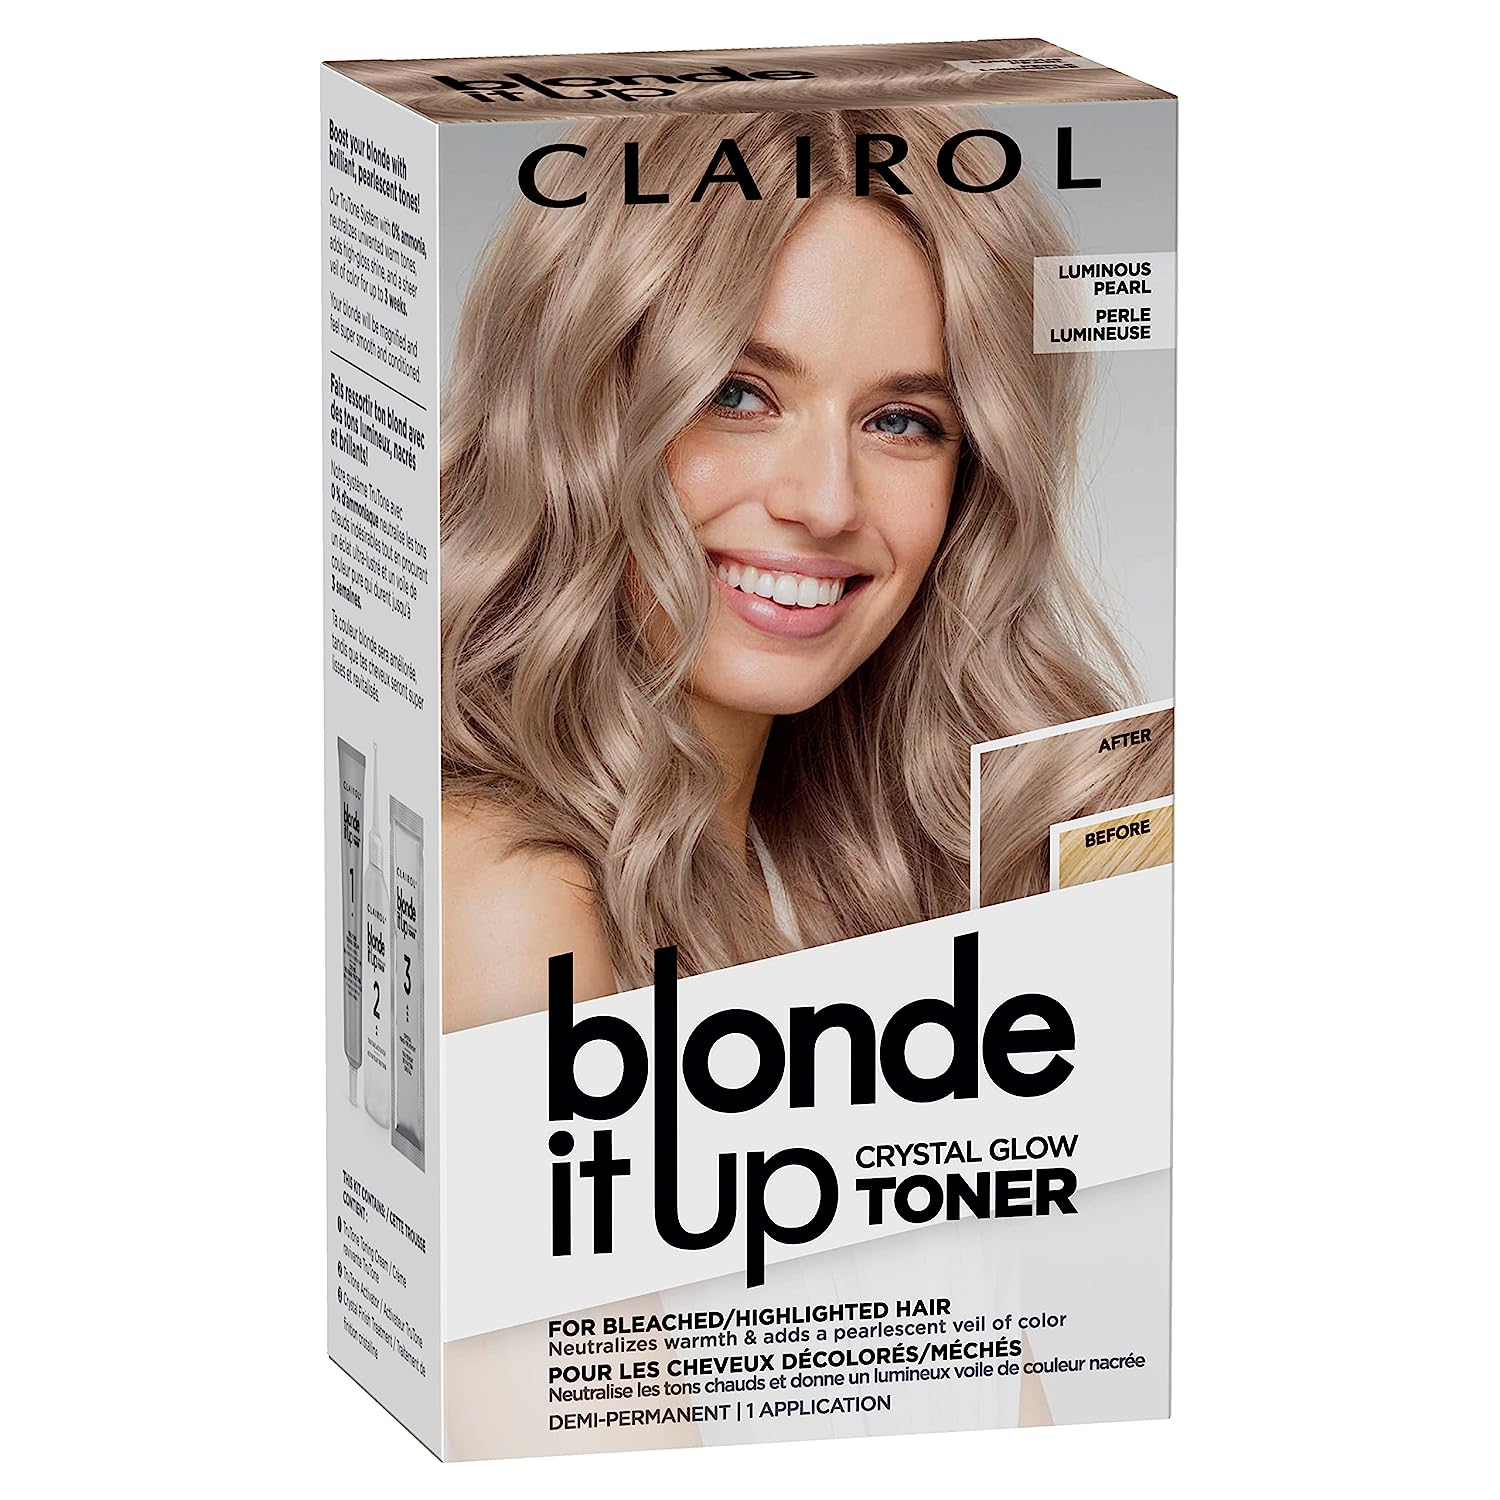 Clairol Blonde It Up Crystal Glow Toners Demi- [...]